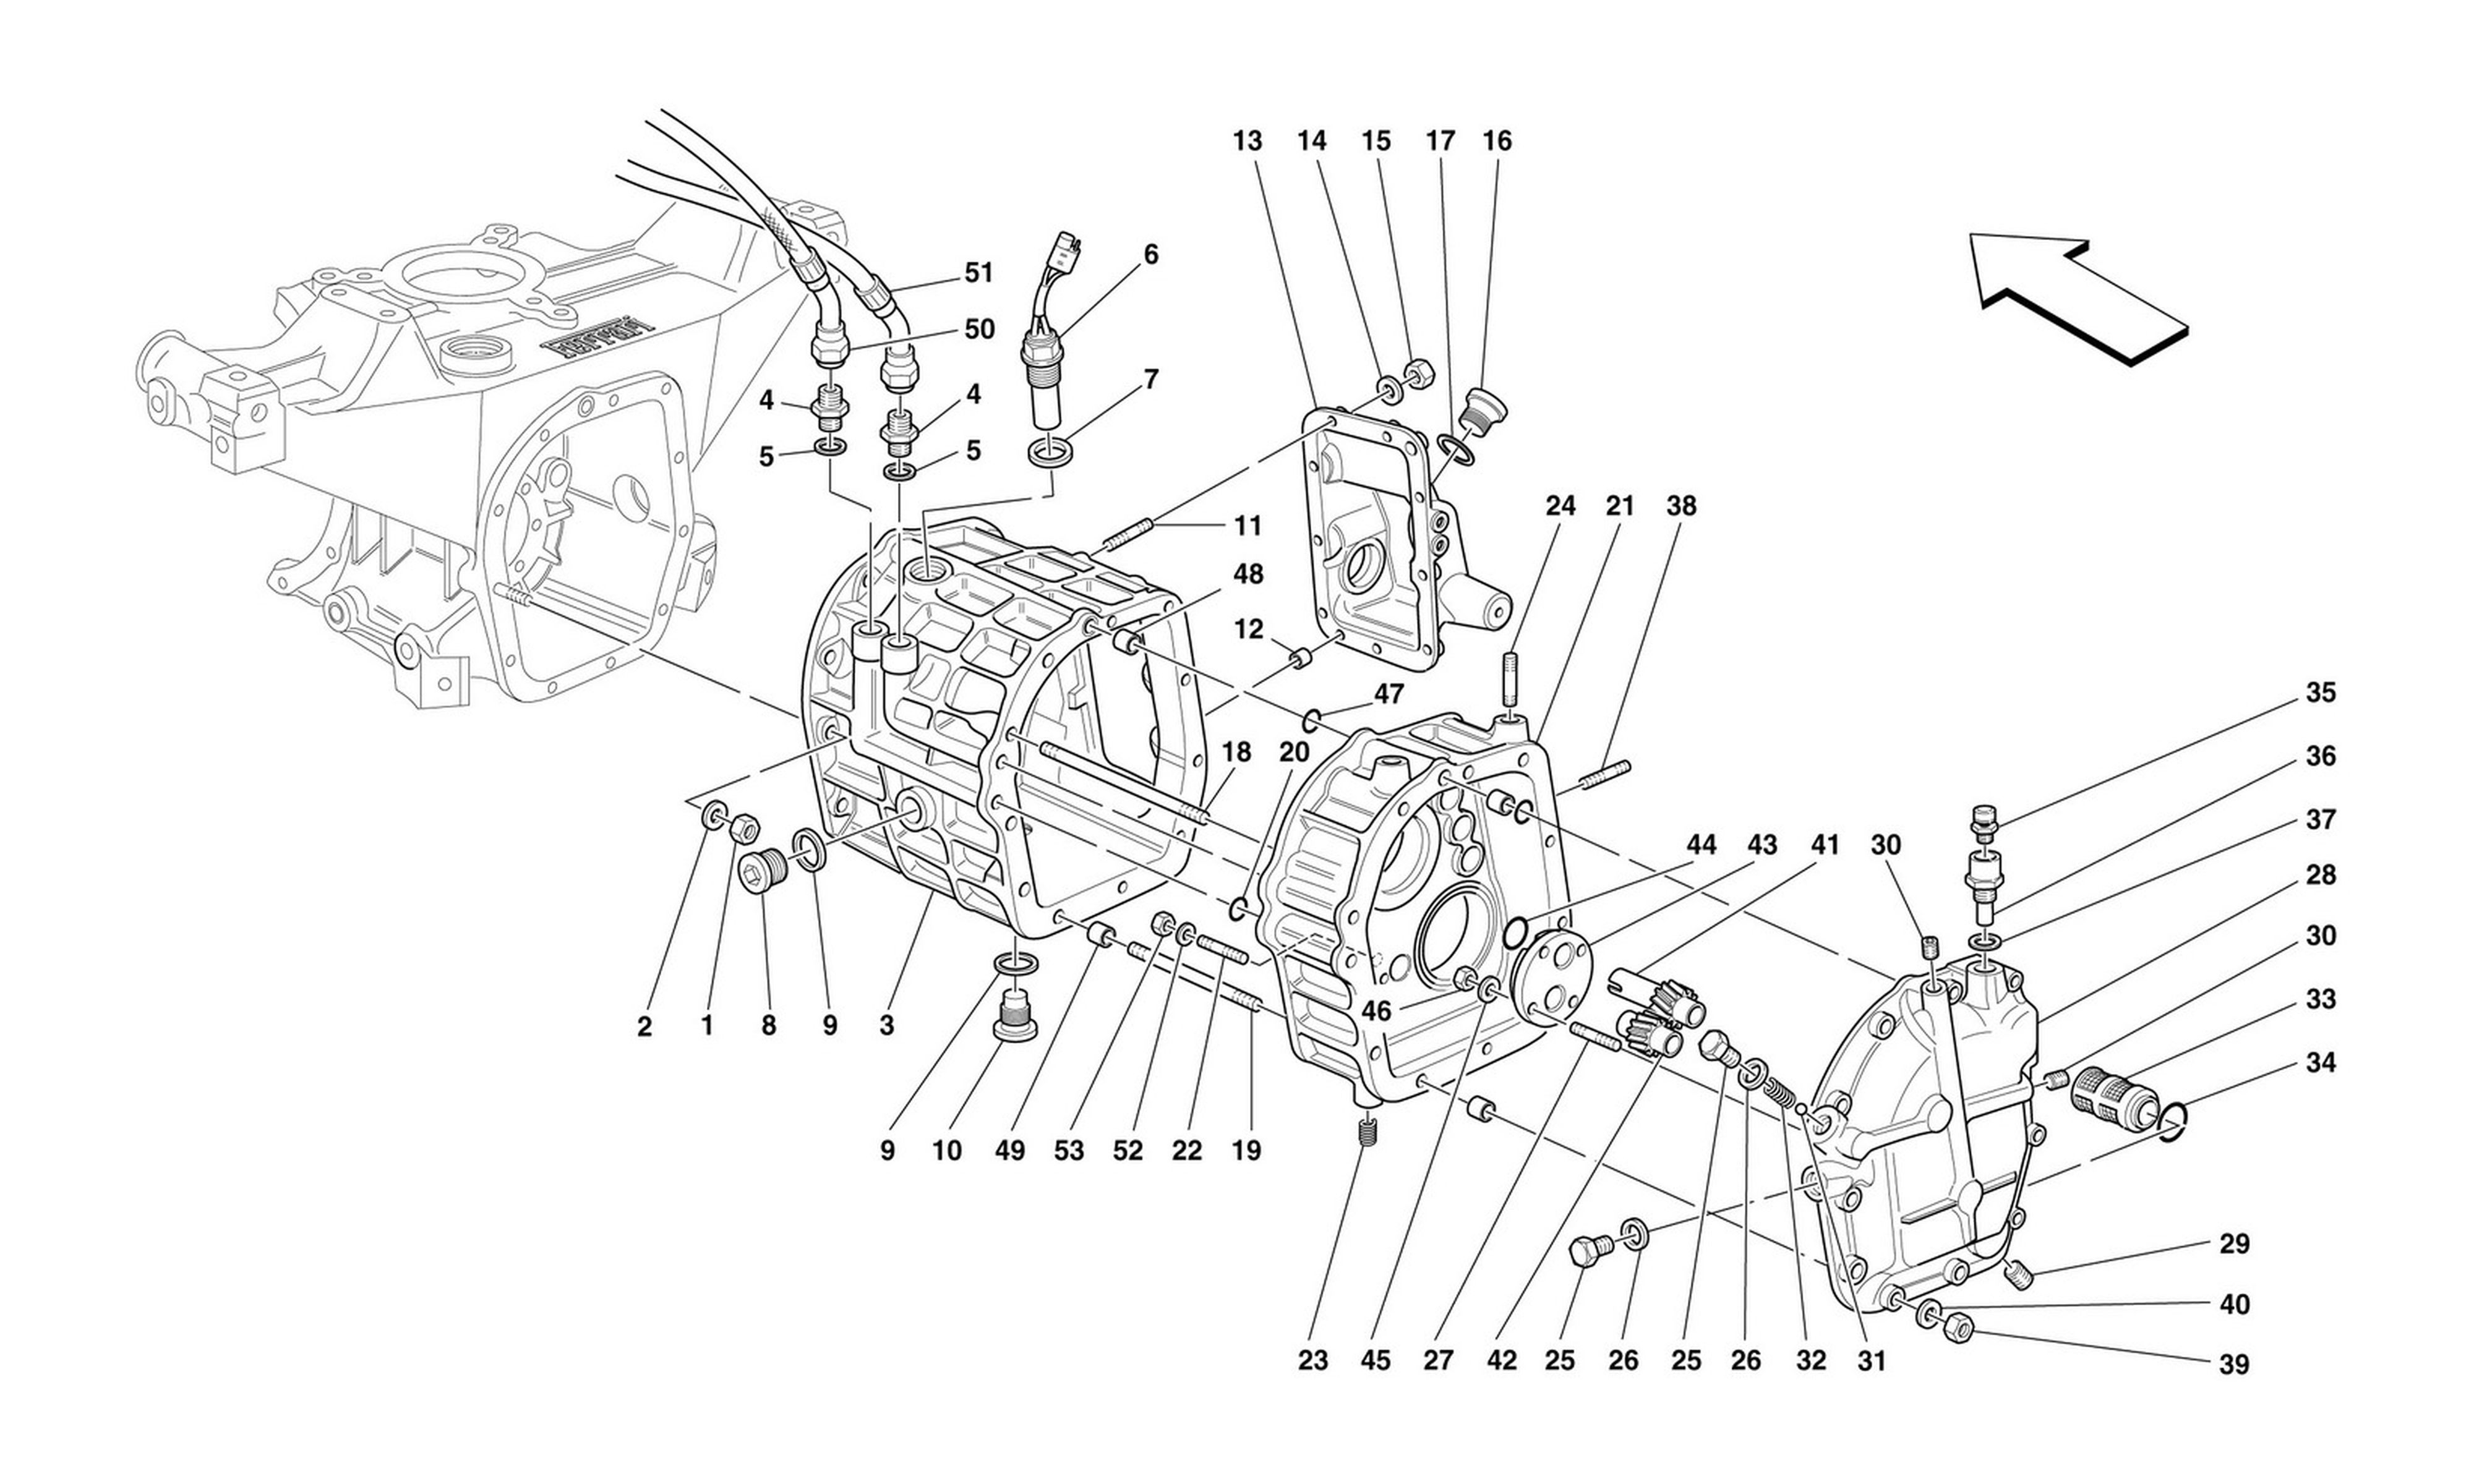 Schematic: Rear Part Gearboxes Housing - Covers And Lubrication